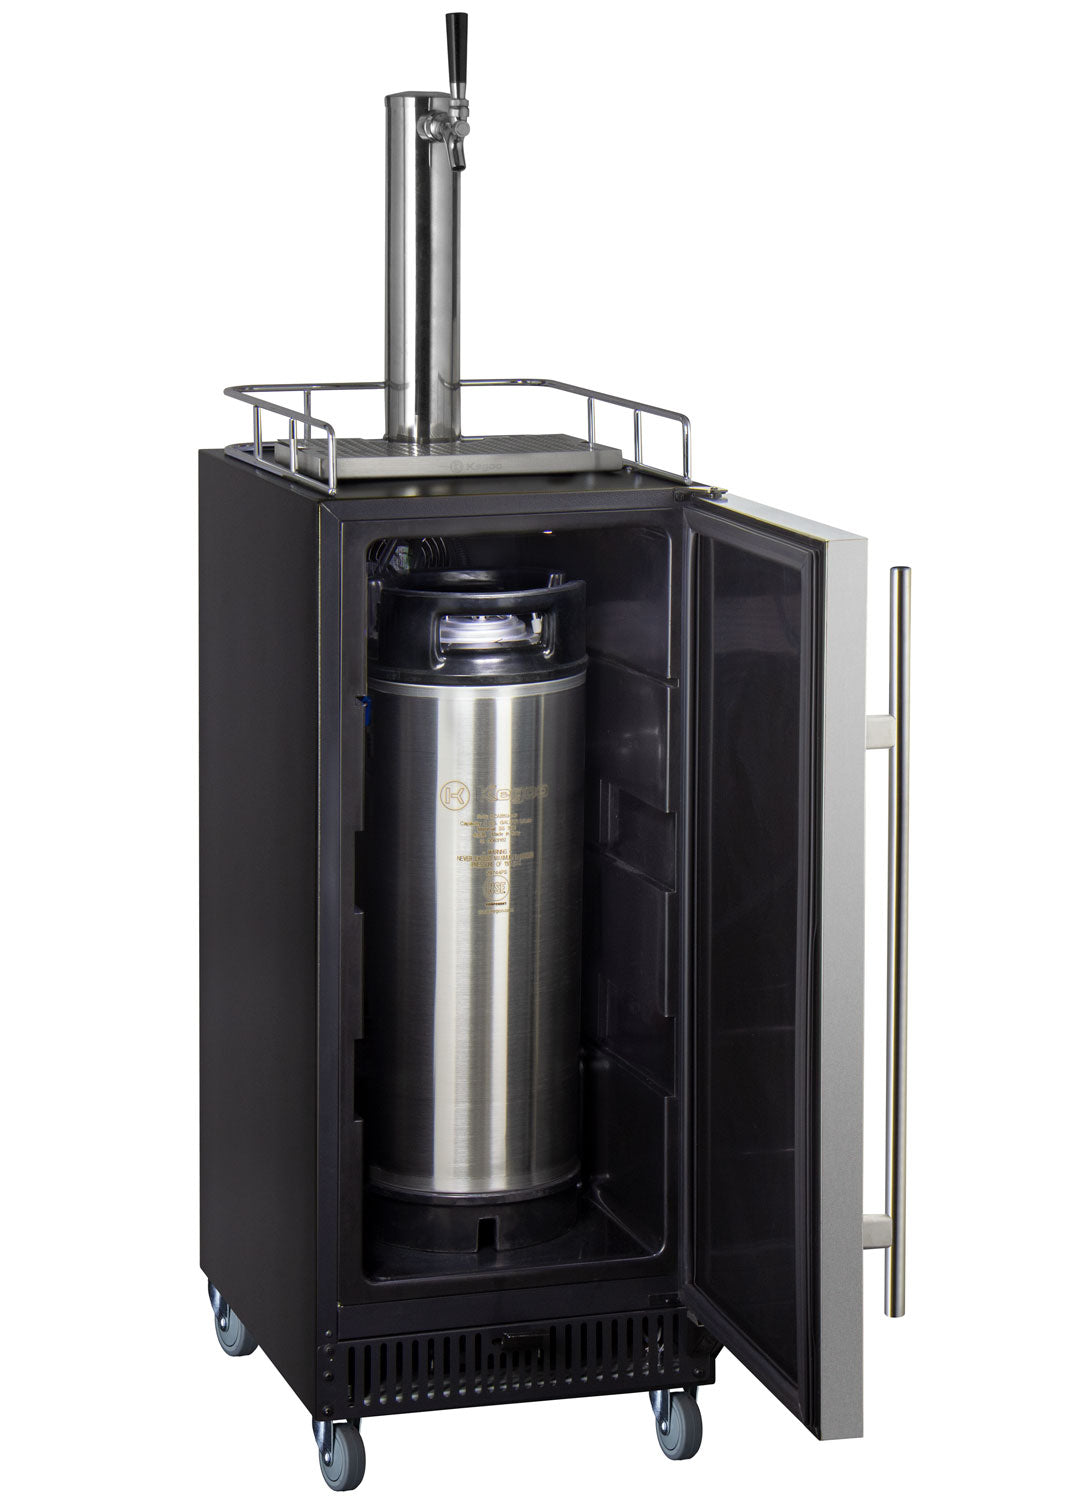 15" Wide Commercial Home Brew Keg Dispenser with Stainless Steel Door